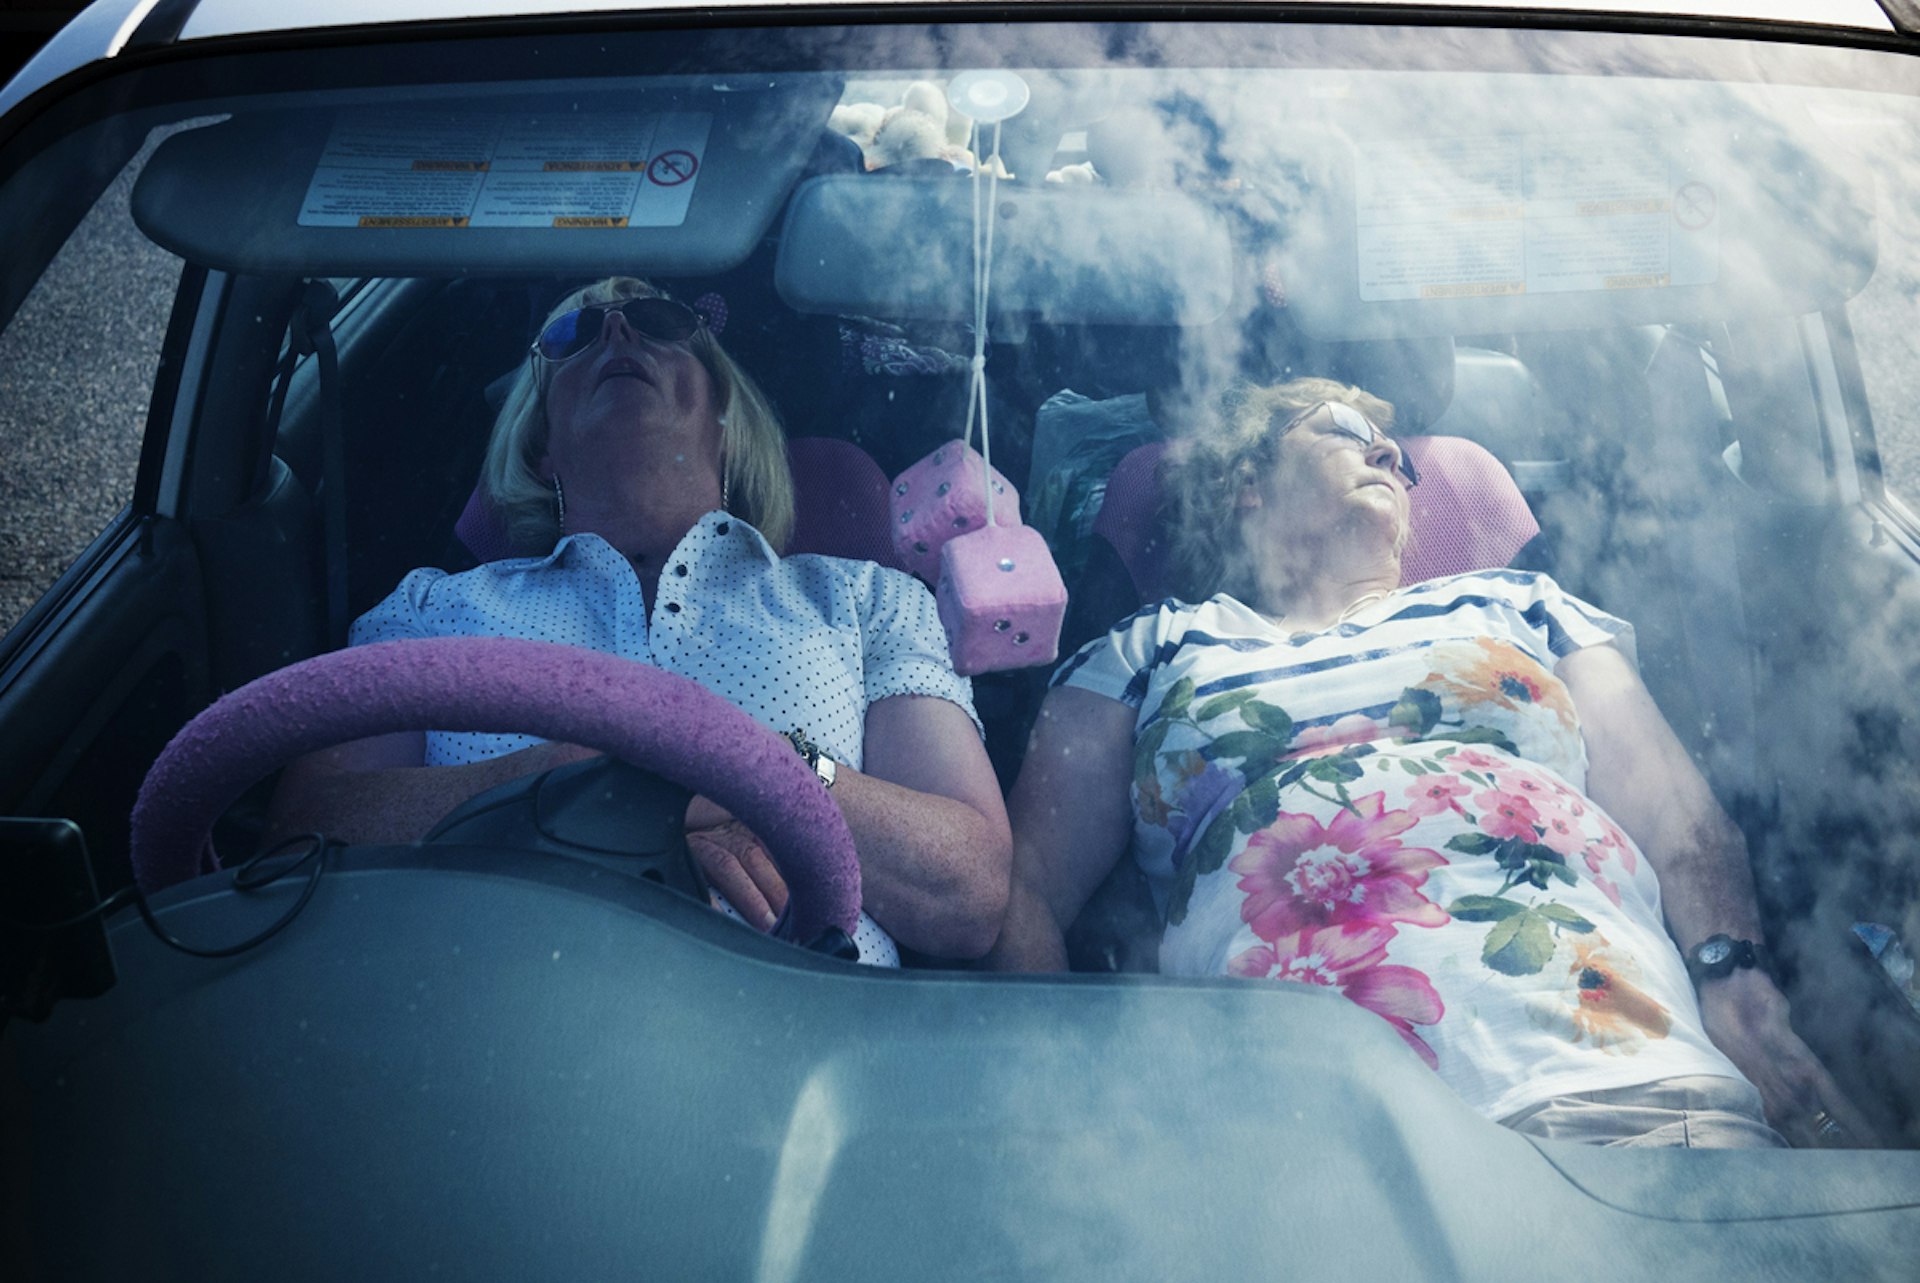 Sleeping grannies by Mike O'Meally